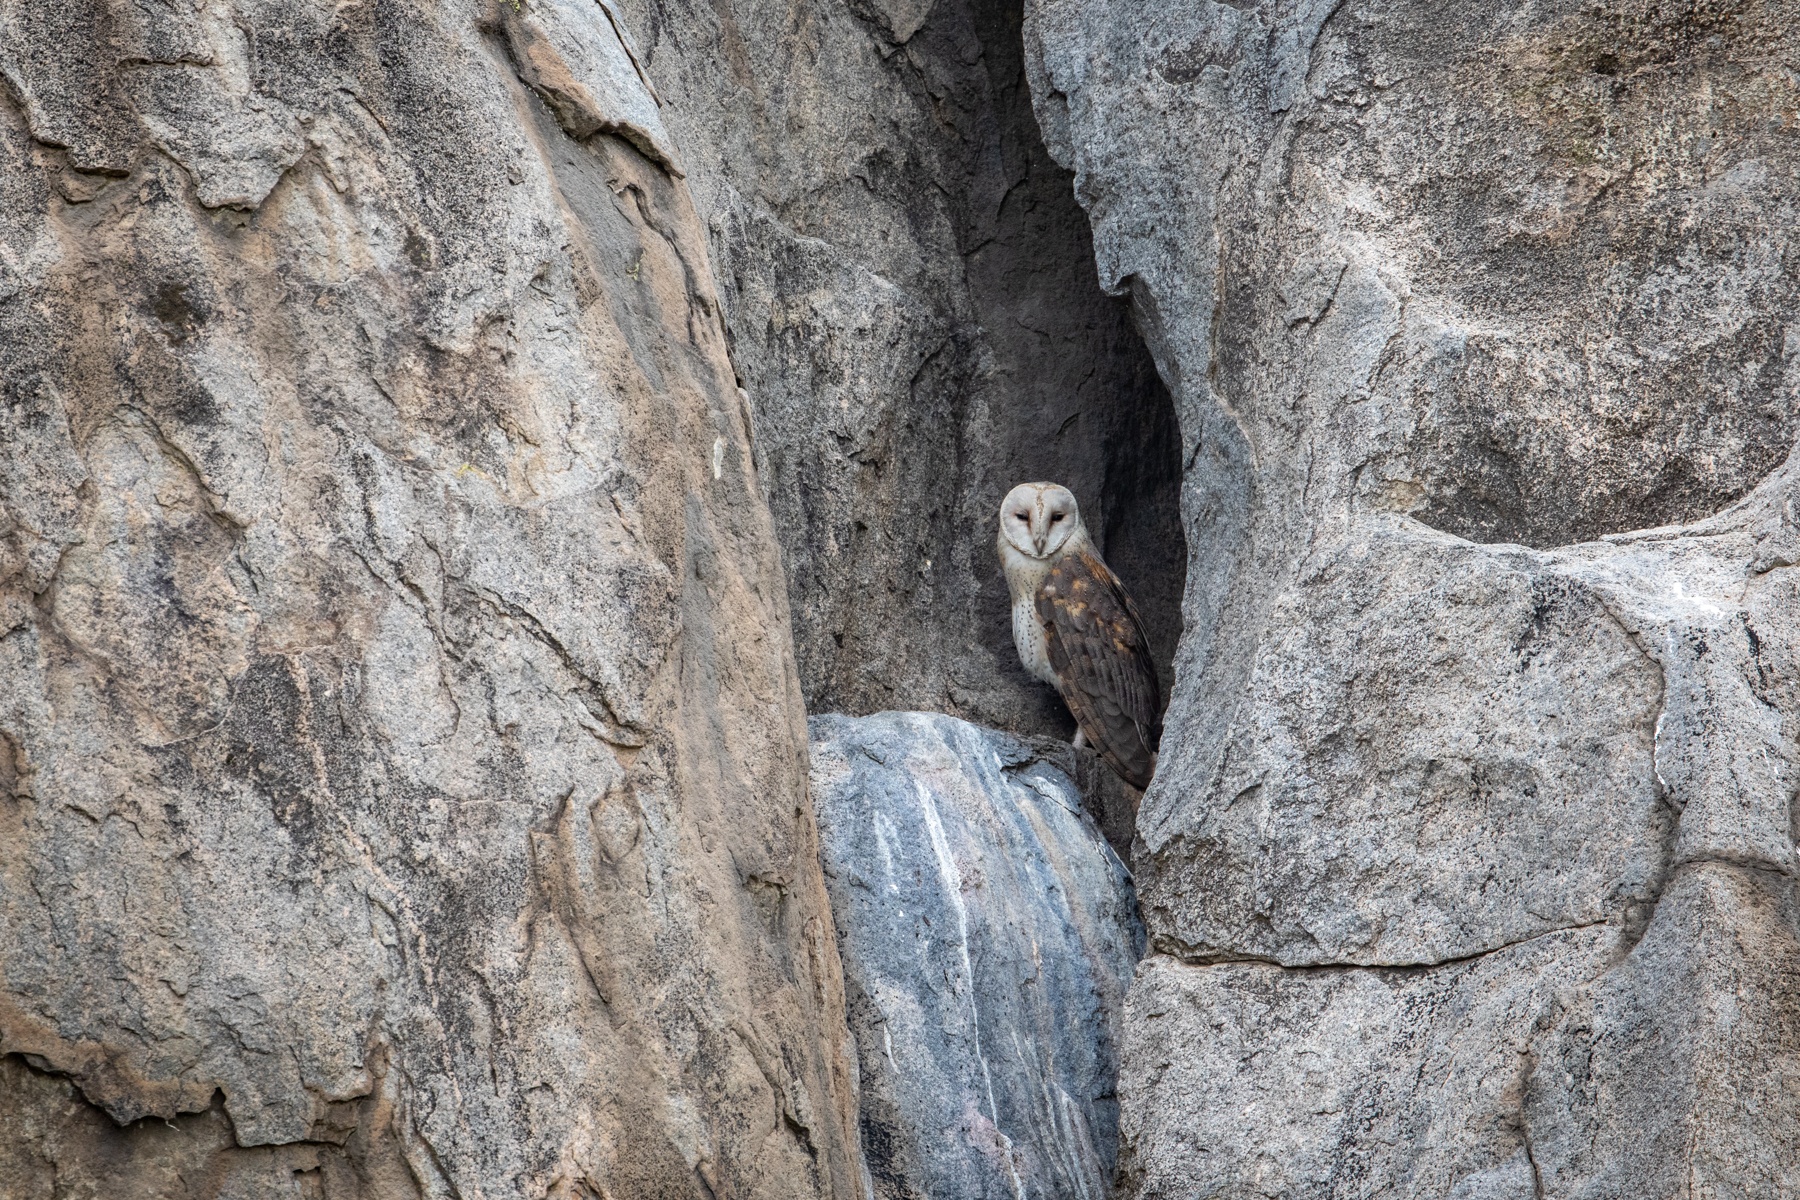 In remote Gul Kopjes we found a beautiful nesting pair of Barn Owls in a rock crevasse